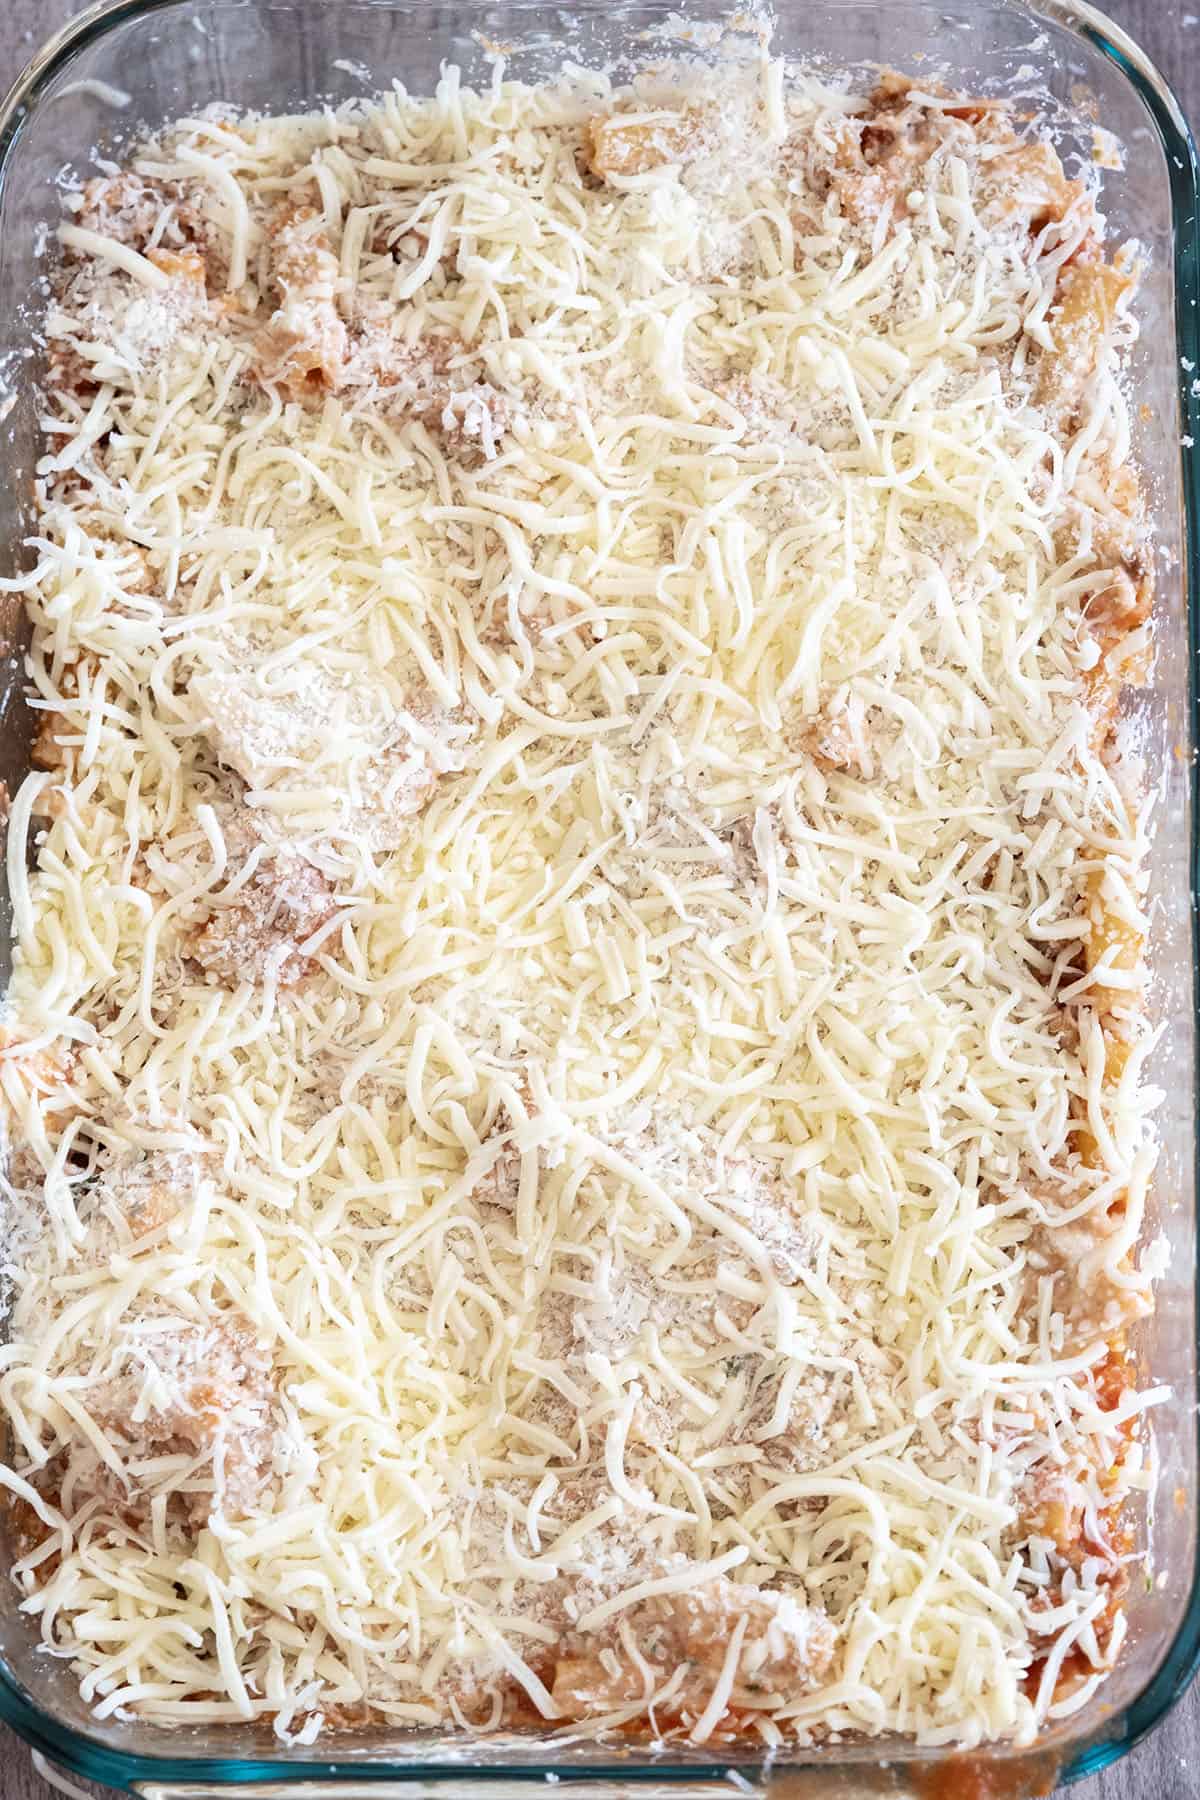 another layer of everything added to the baking dish topped with extra parmesan and mozzarella